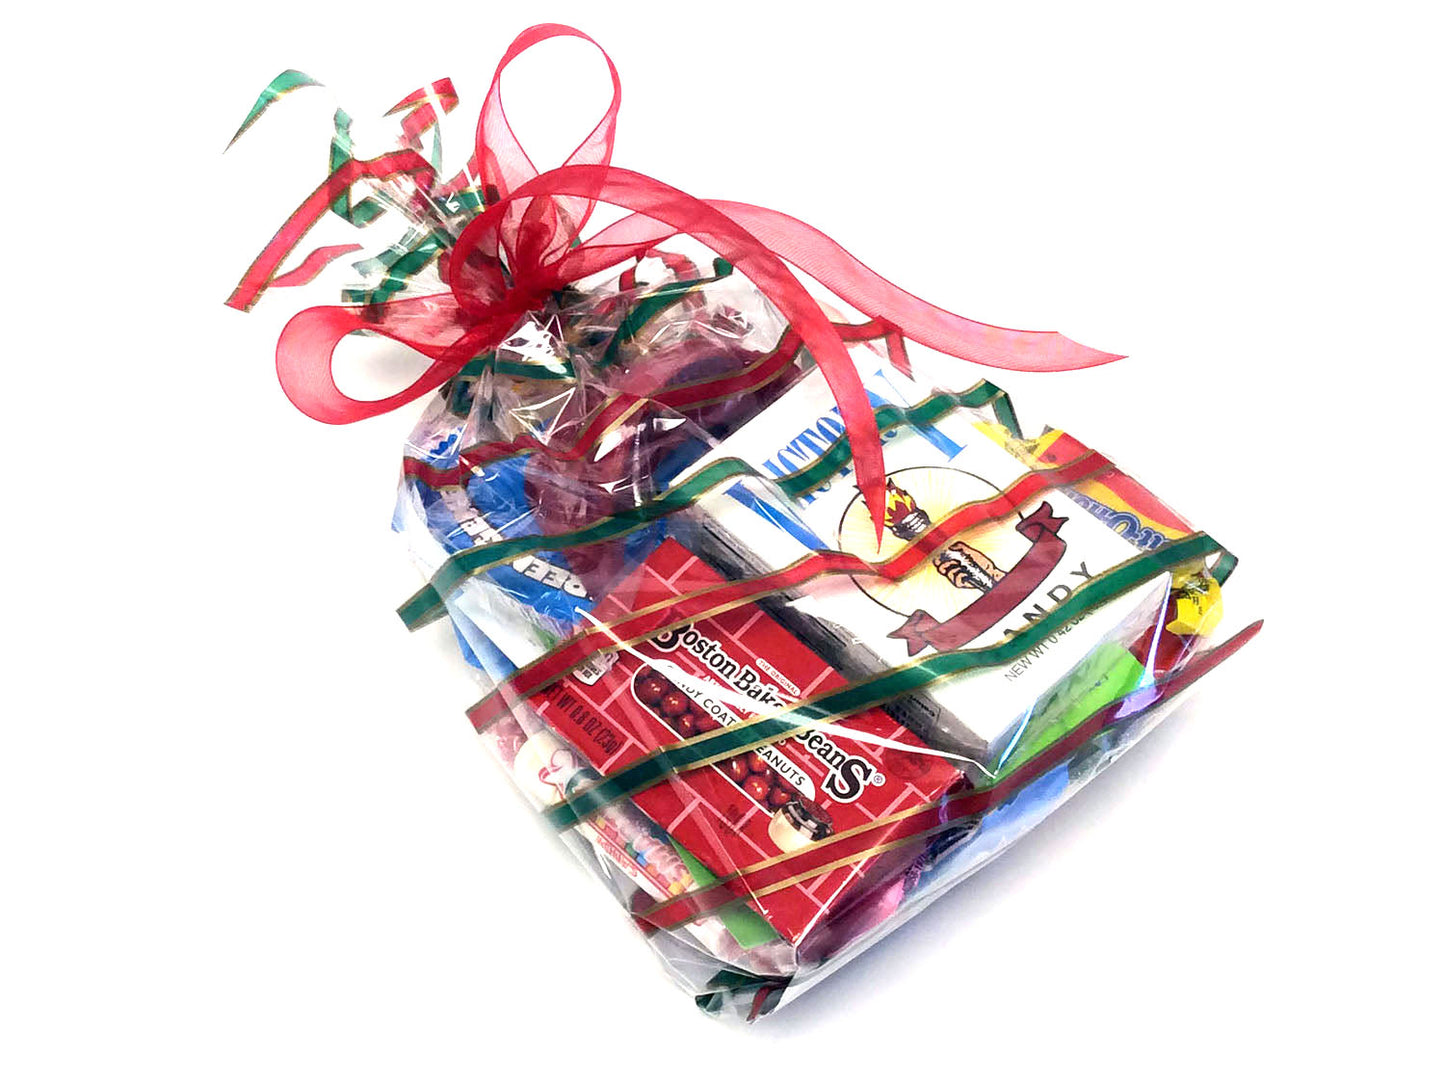 Party Favor Bag with candy - Red Green & Gold Stripes